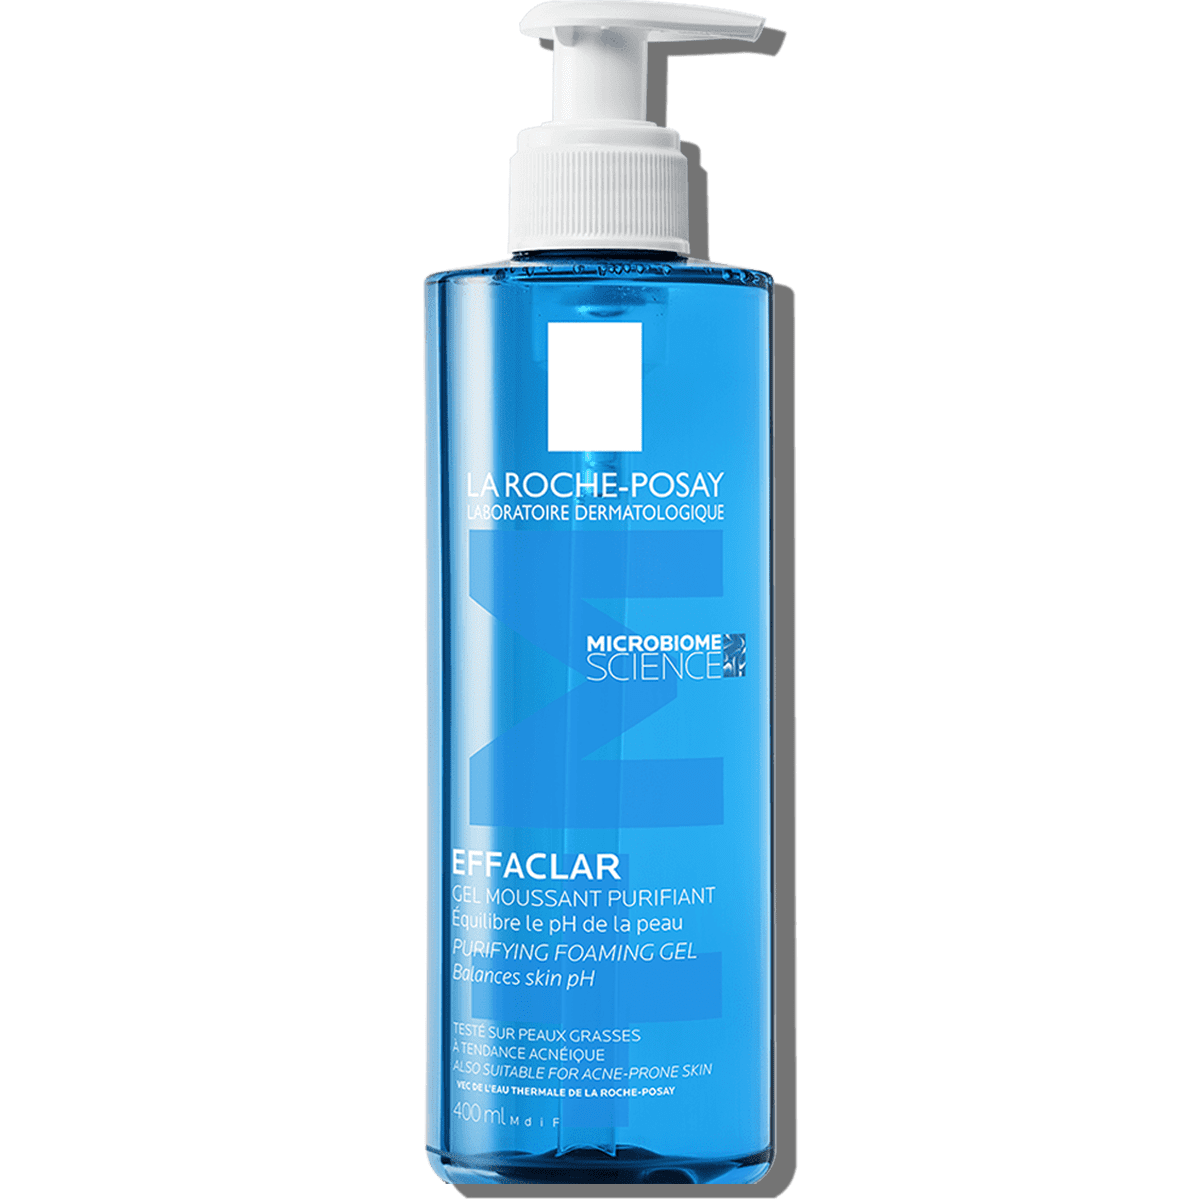 La-Roche-Posay-ProductPage-Acne-Effaclar-Cleansing-Foaming-Gel-400ml-3337872411991-Zoom-front